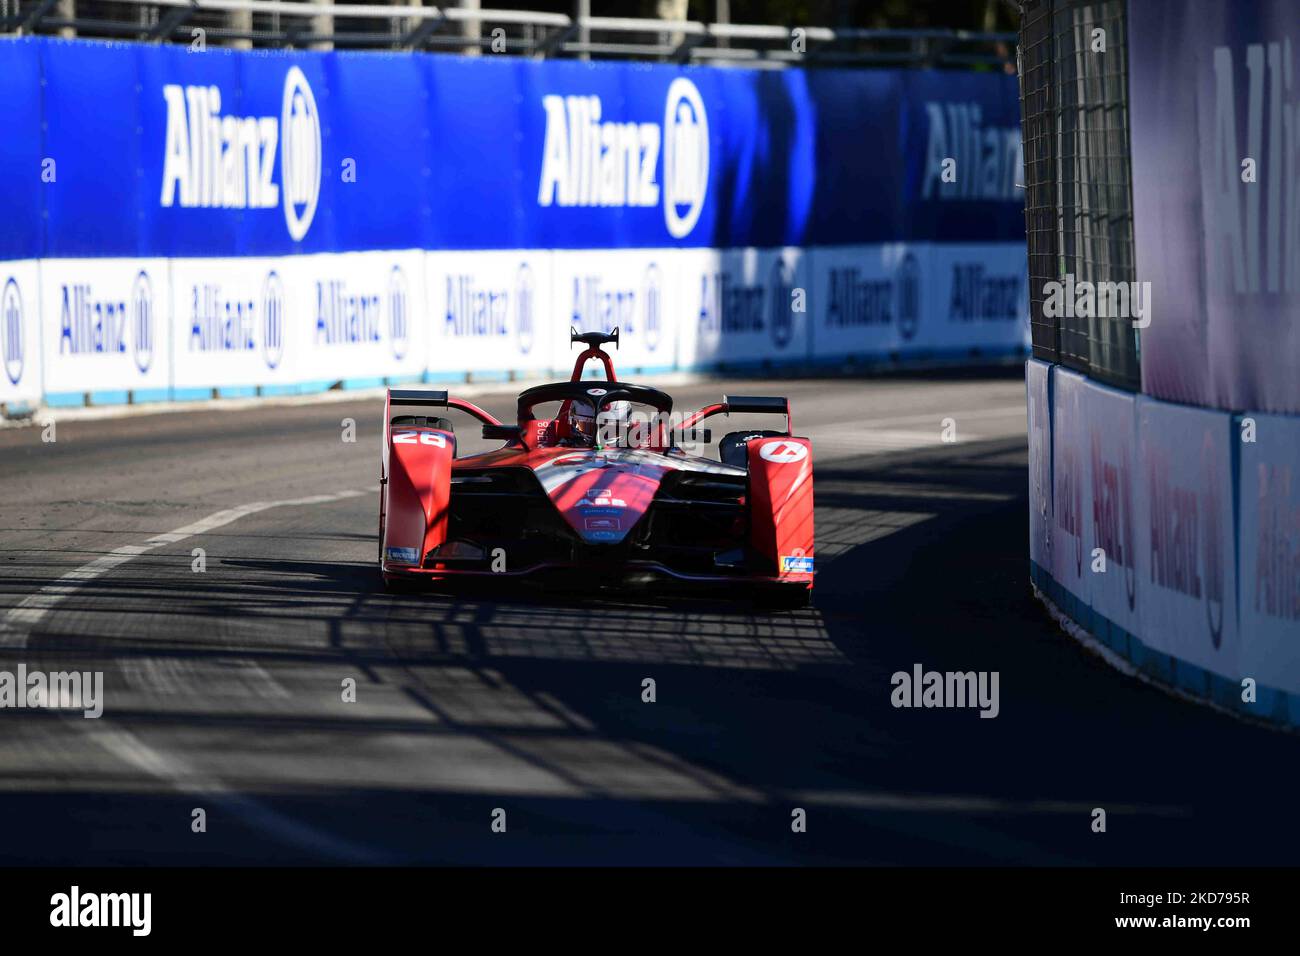 Olivier Askew of Andretti Autosport during qualifying of Day 2 of Rome E-Prix, 5th round of Formula E World Championship in city circuit of Rome, EUR neighborhood Rome, 10 April 2022 (Photo by Andrea Diodato/NurPhoto) Stock Photo